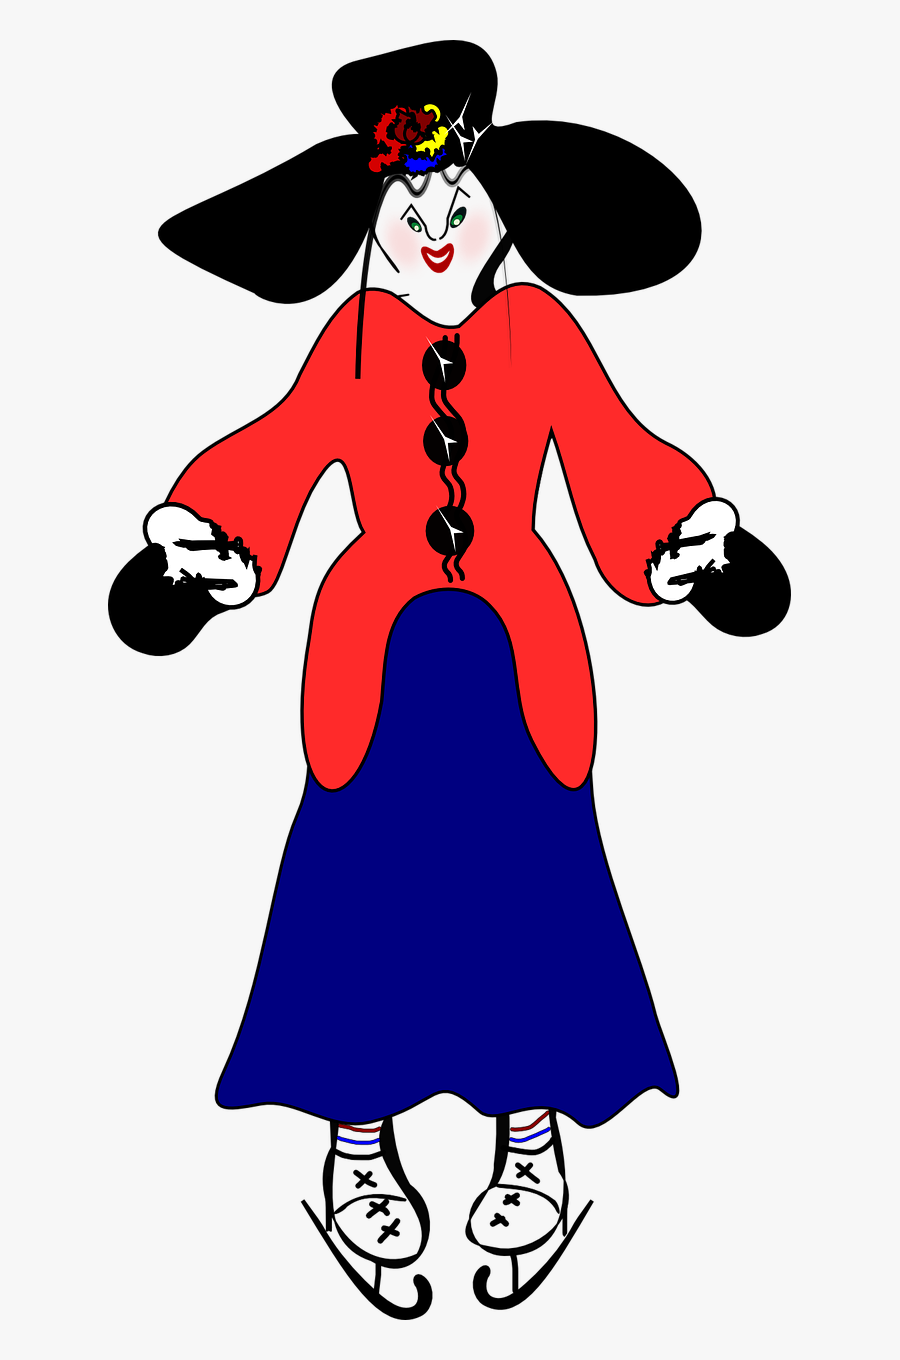 Lady Wearing Hat And Ice Skating Shoes - Clip Art, Transparent Clipart